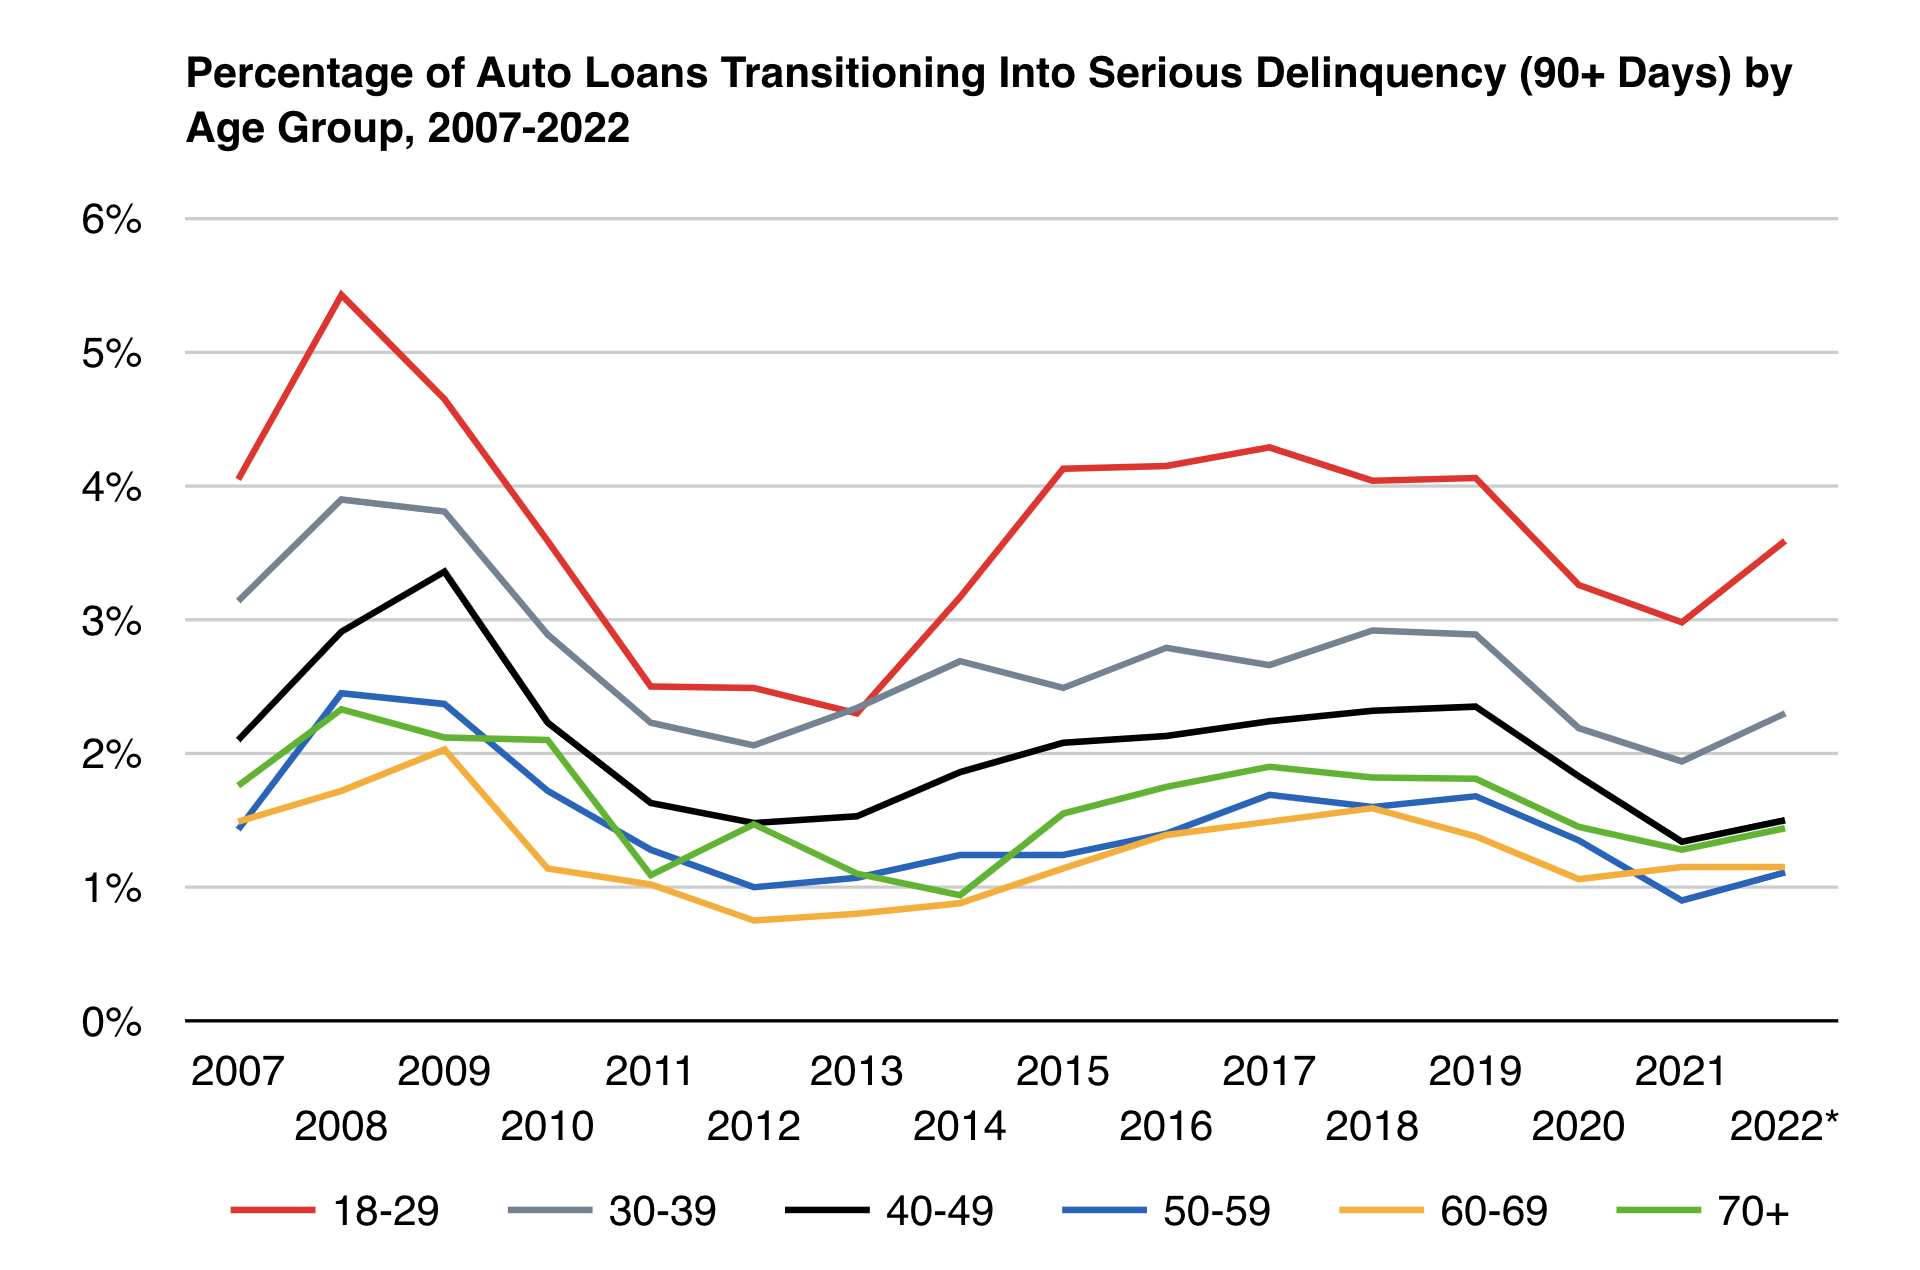 Line chart showing percentage of auto loans transitioning into serious delinquency by age group from 2007 to 2022.